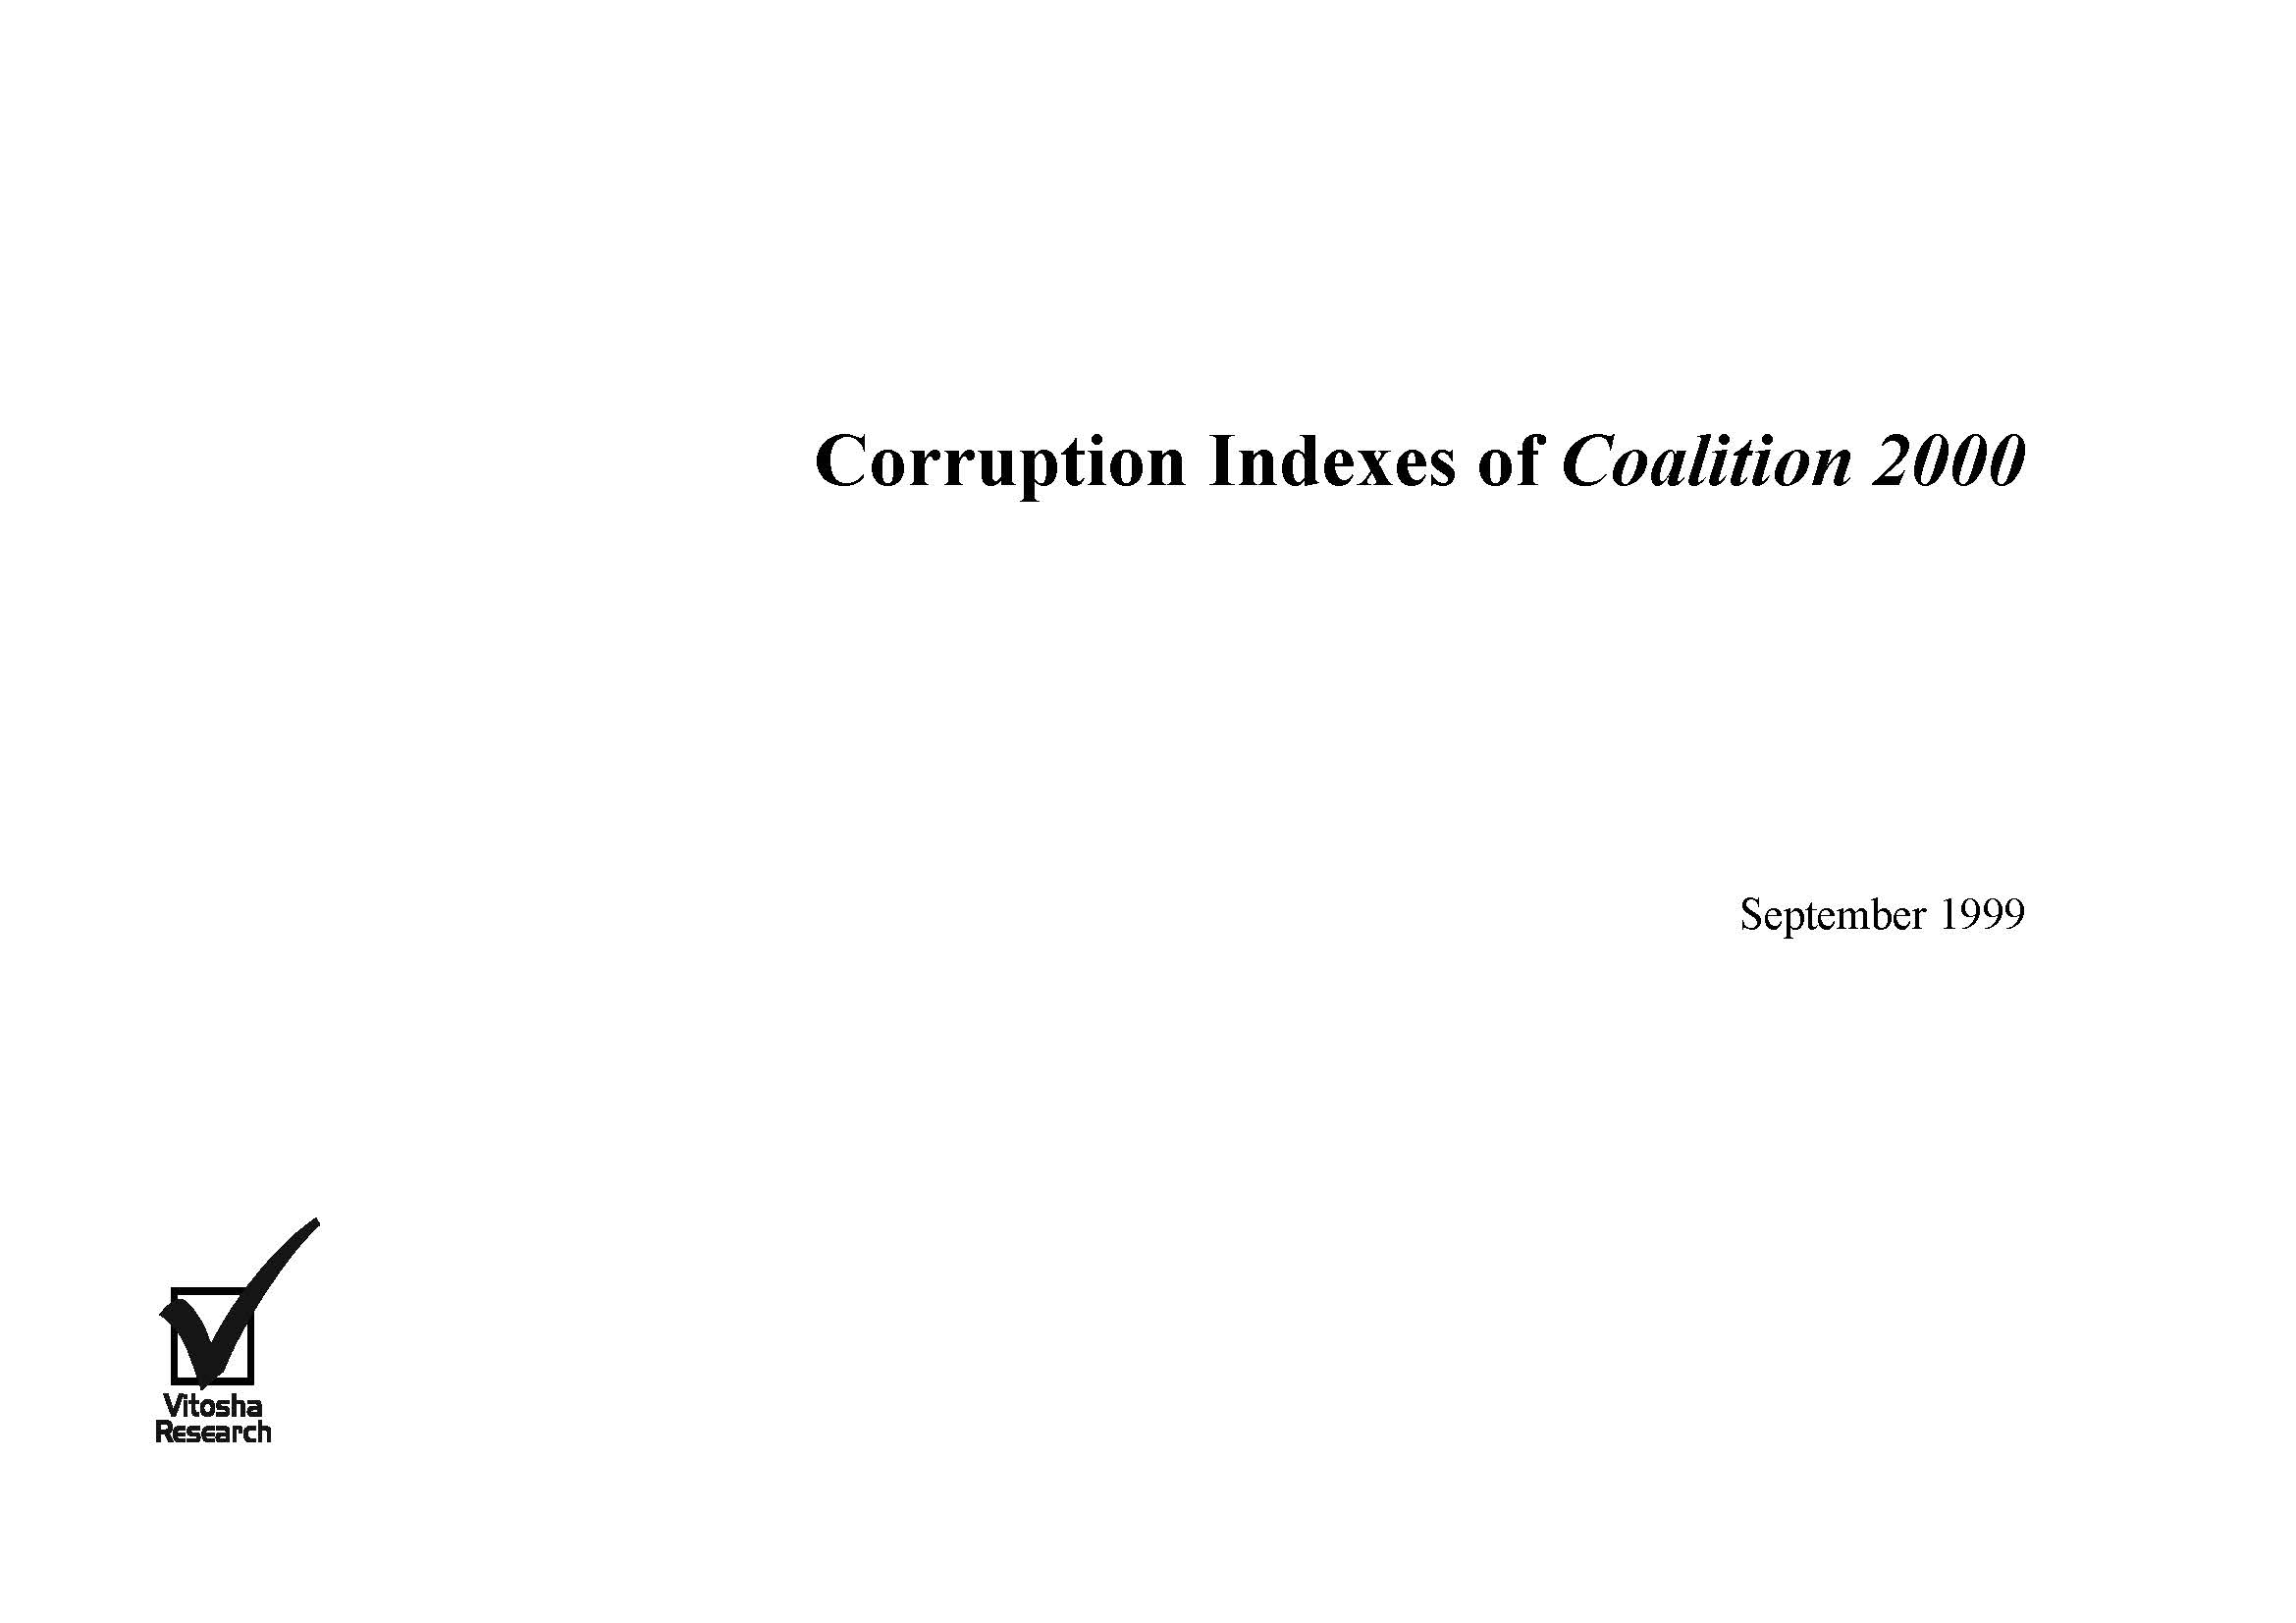 Corruption indices of Coalition 2000, September 1999